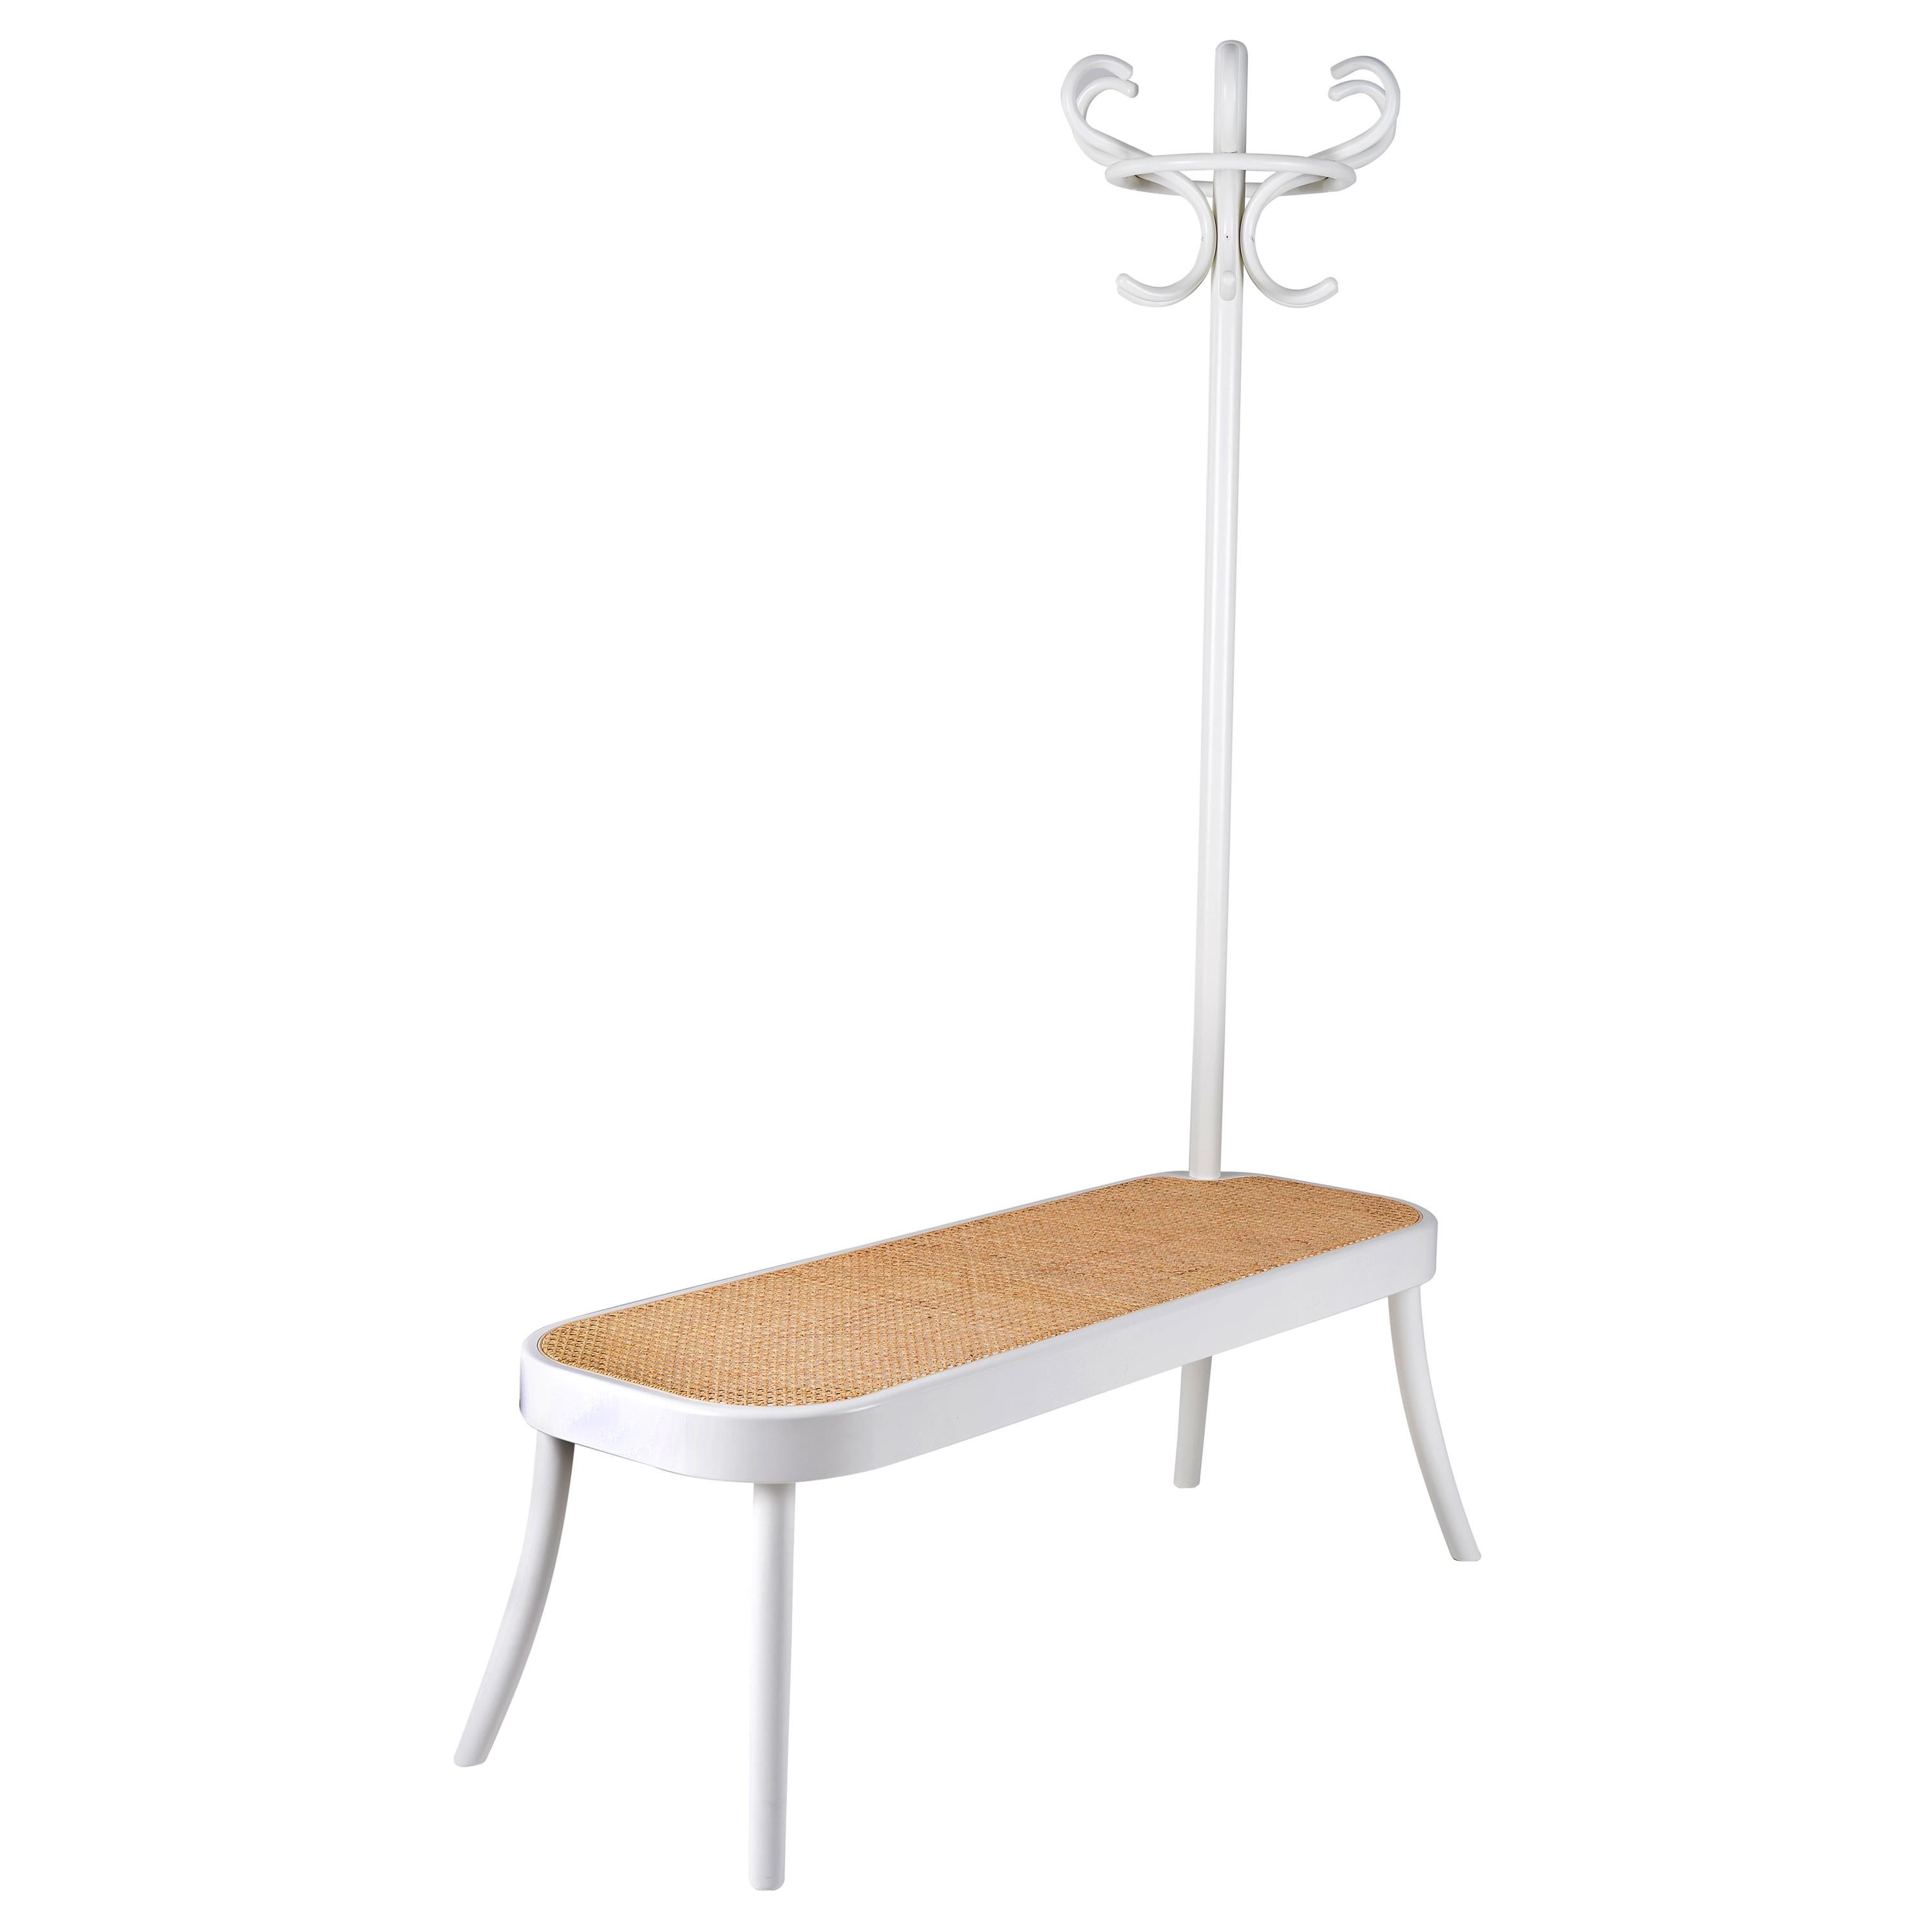 Gebrüder Thonet Vienna GmbH Coat Rack Bench in Pure White with Cane Seat For Sale